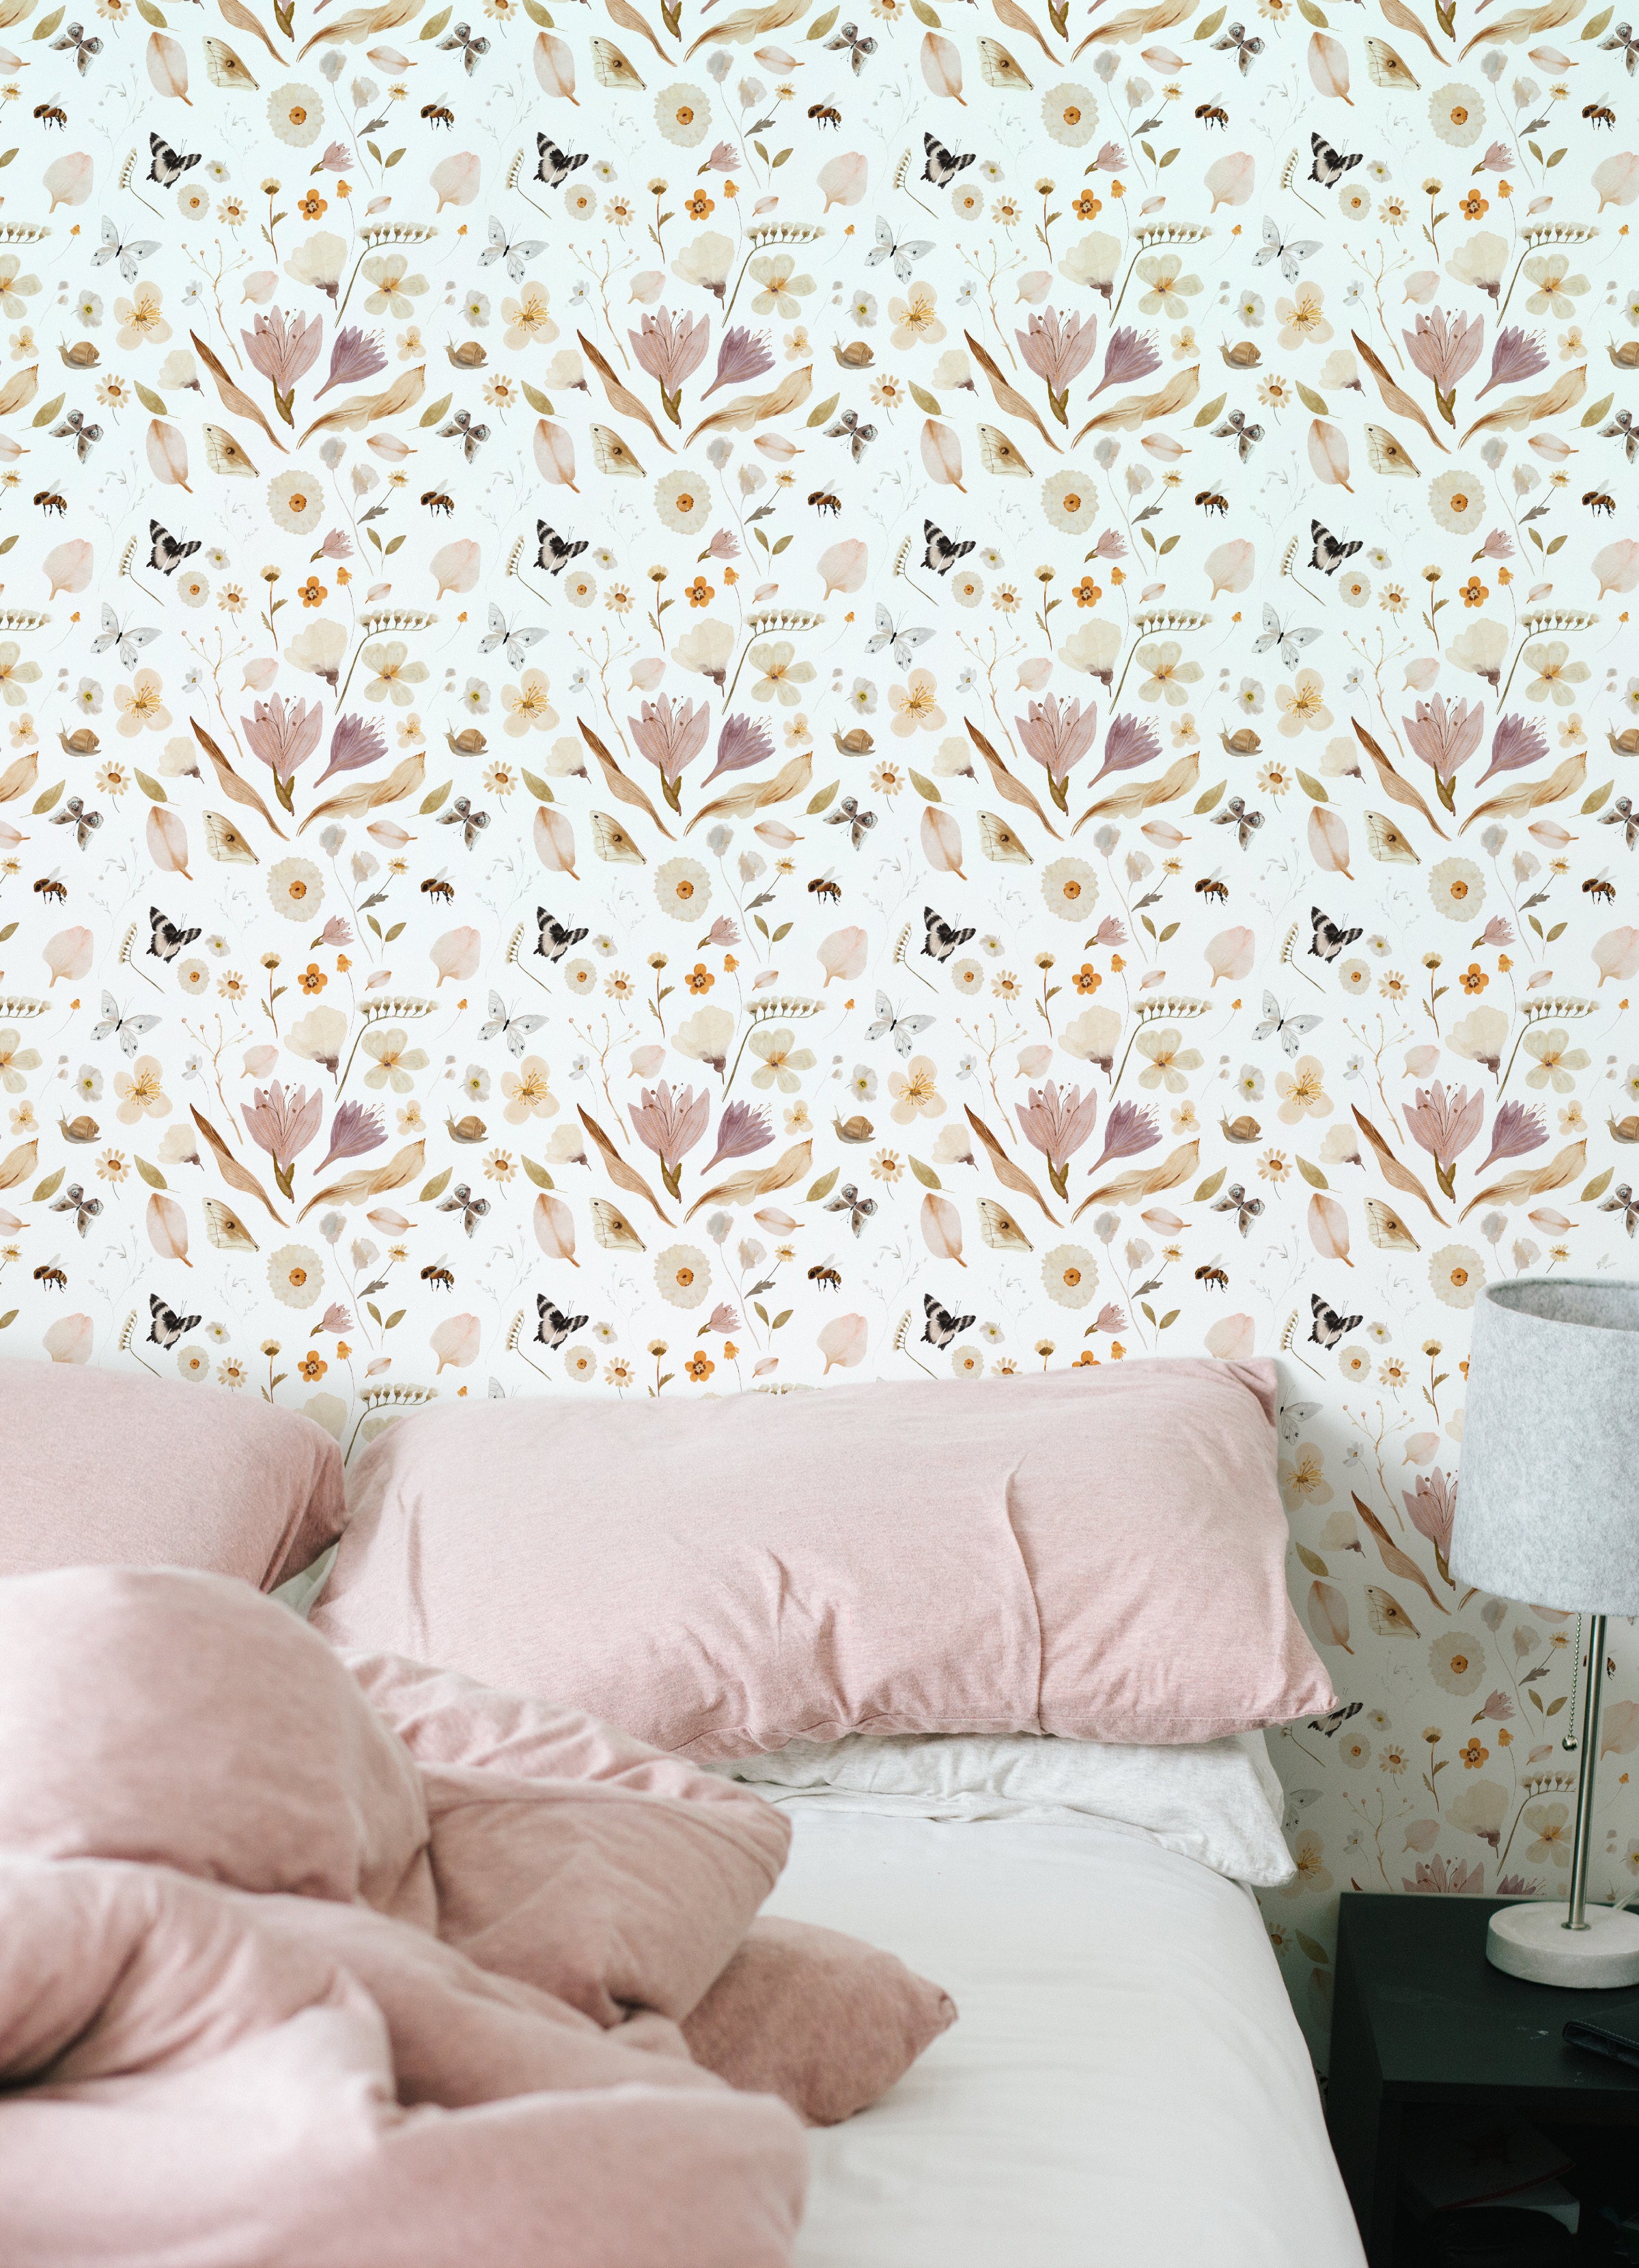 A square image displaying the Boho Garden Wallpaper in a bedroom setting. The floral pattern creates a focal point behind a bed with blush-colored pillows, complementing the relaxed bohemian aesthetic of the room.